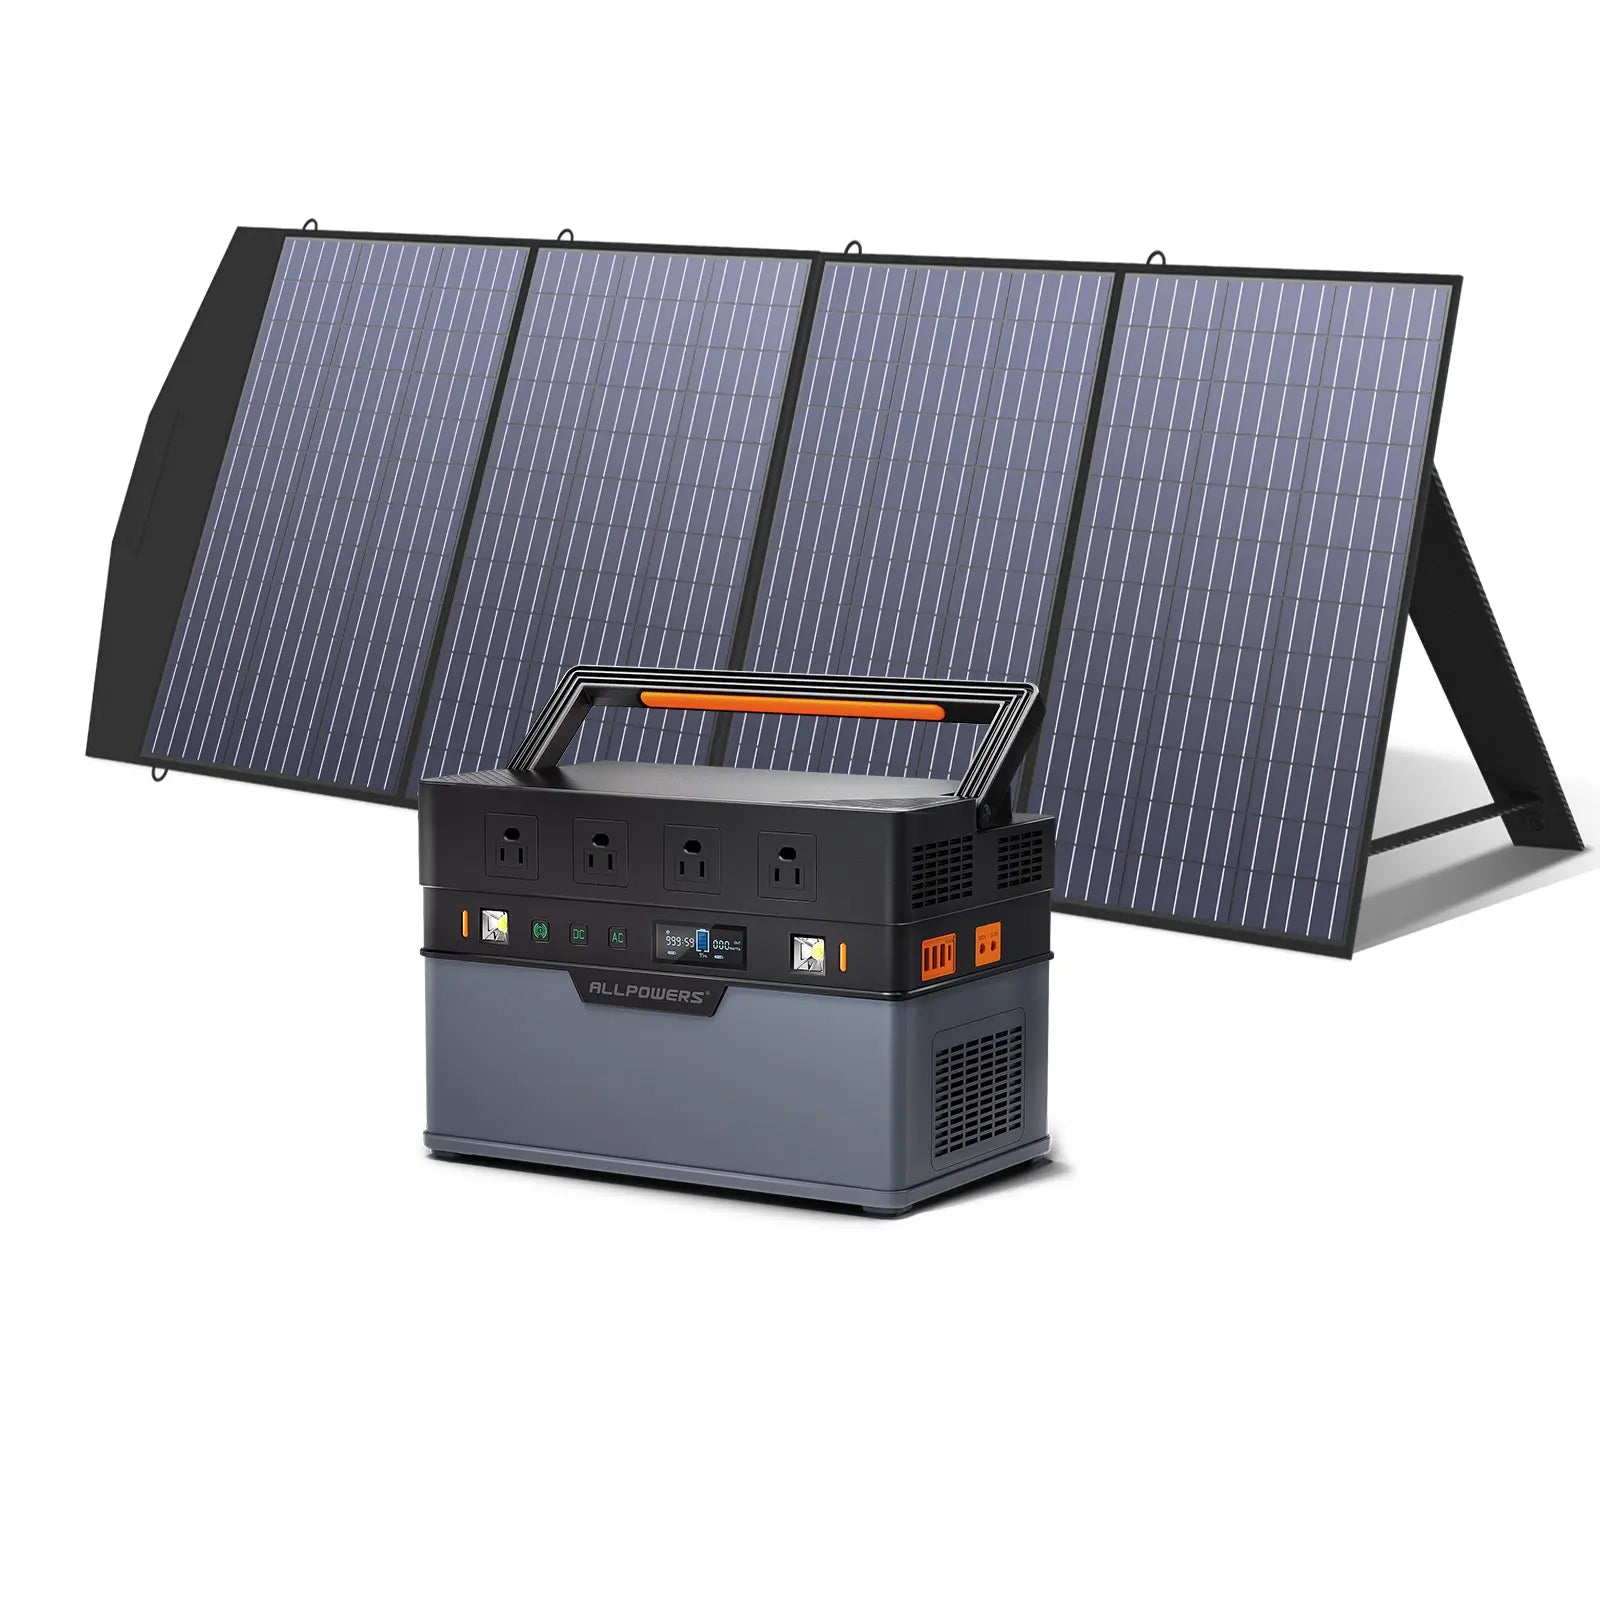 ALLPOWERS S1500 Portable Power Station 1500W 1092Wh (S1500 + SP033 200W Solar Panel)